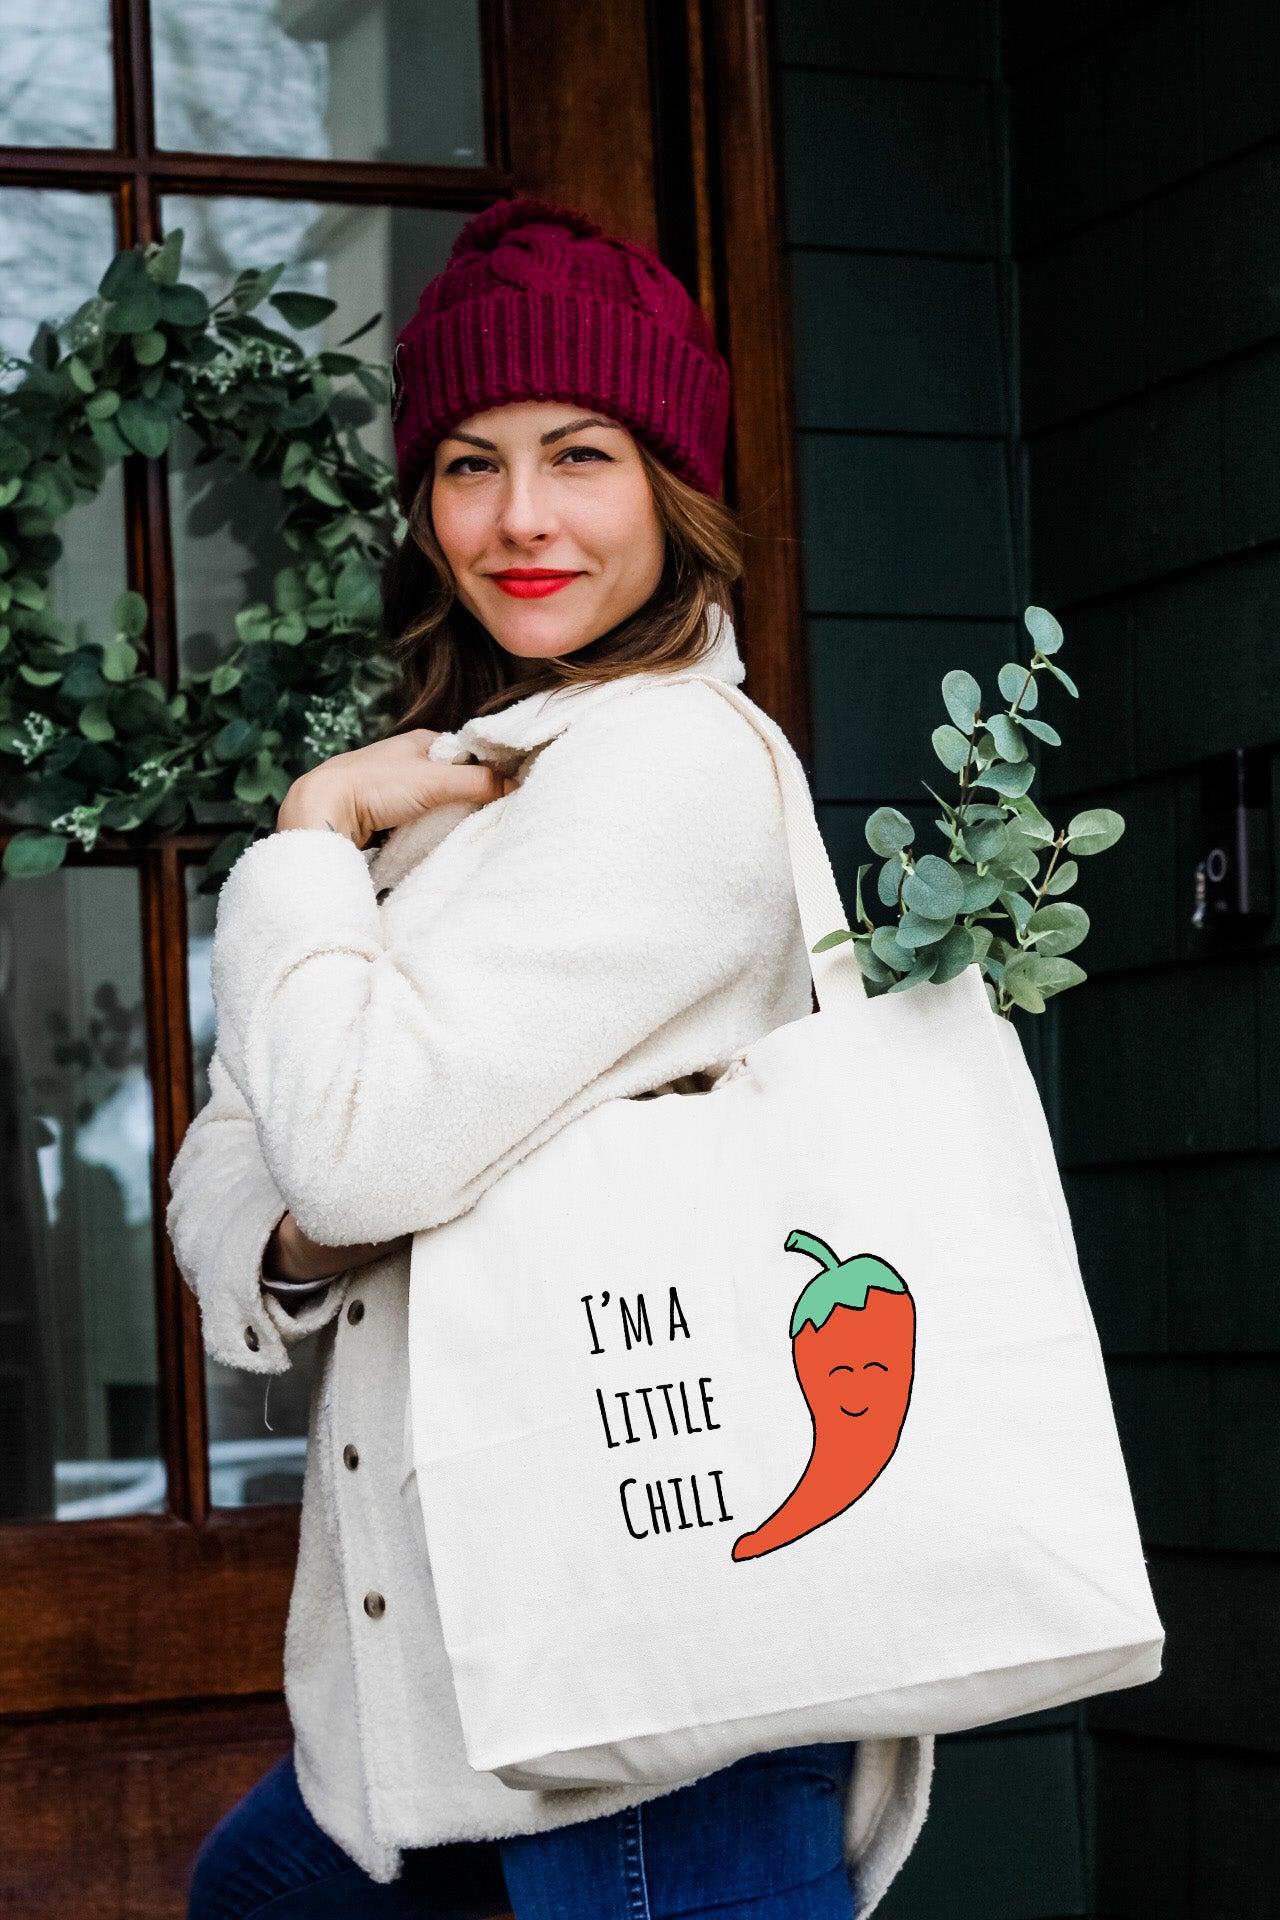 a woman carrying a bag with a chili on it